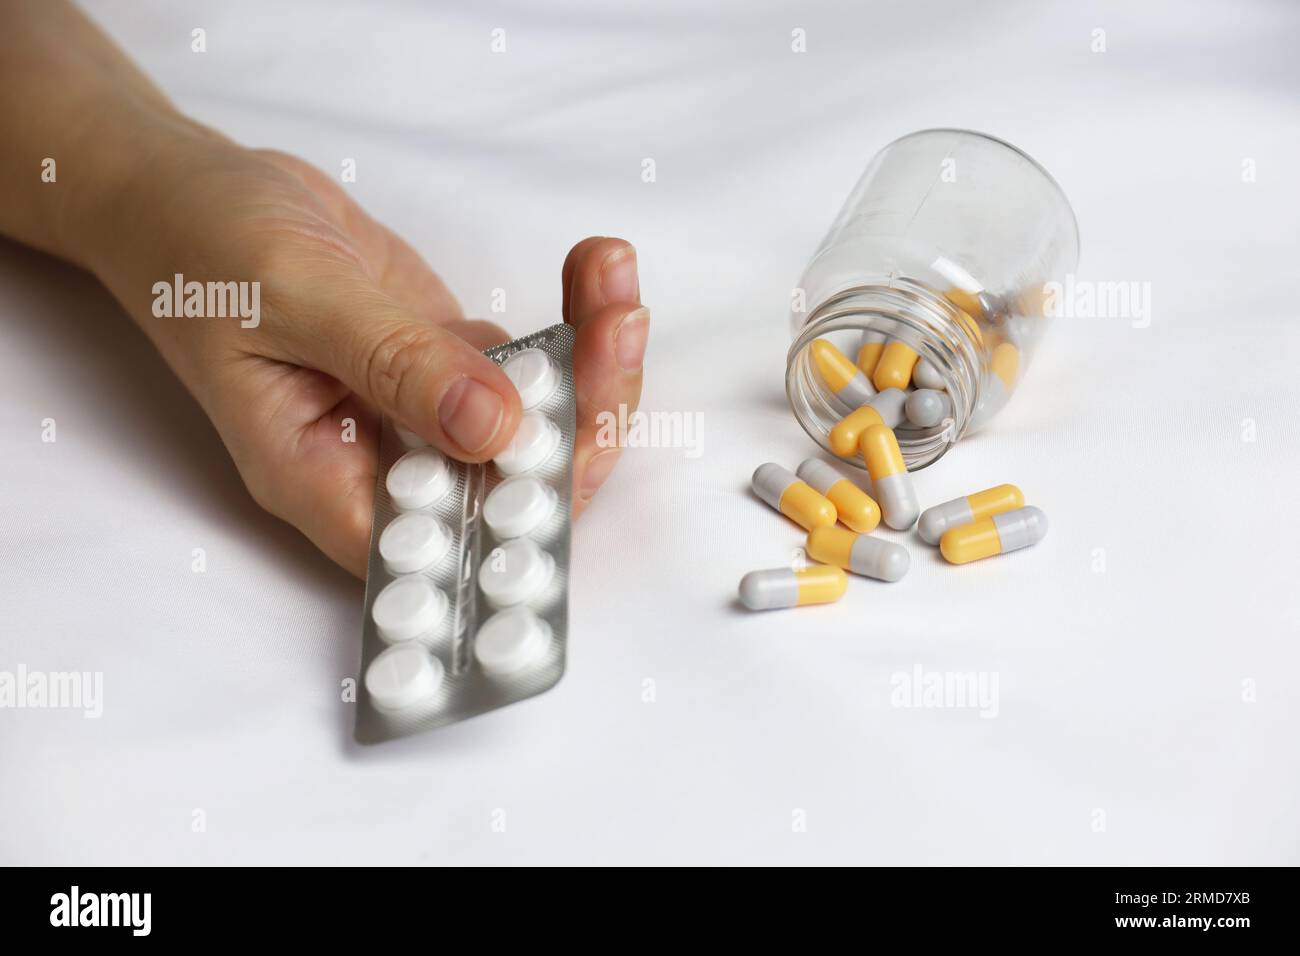 Pills in a palm of female hand on the bed. Concept of medication, vitamins or sleeping pill Stock Photo